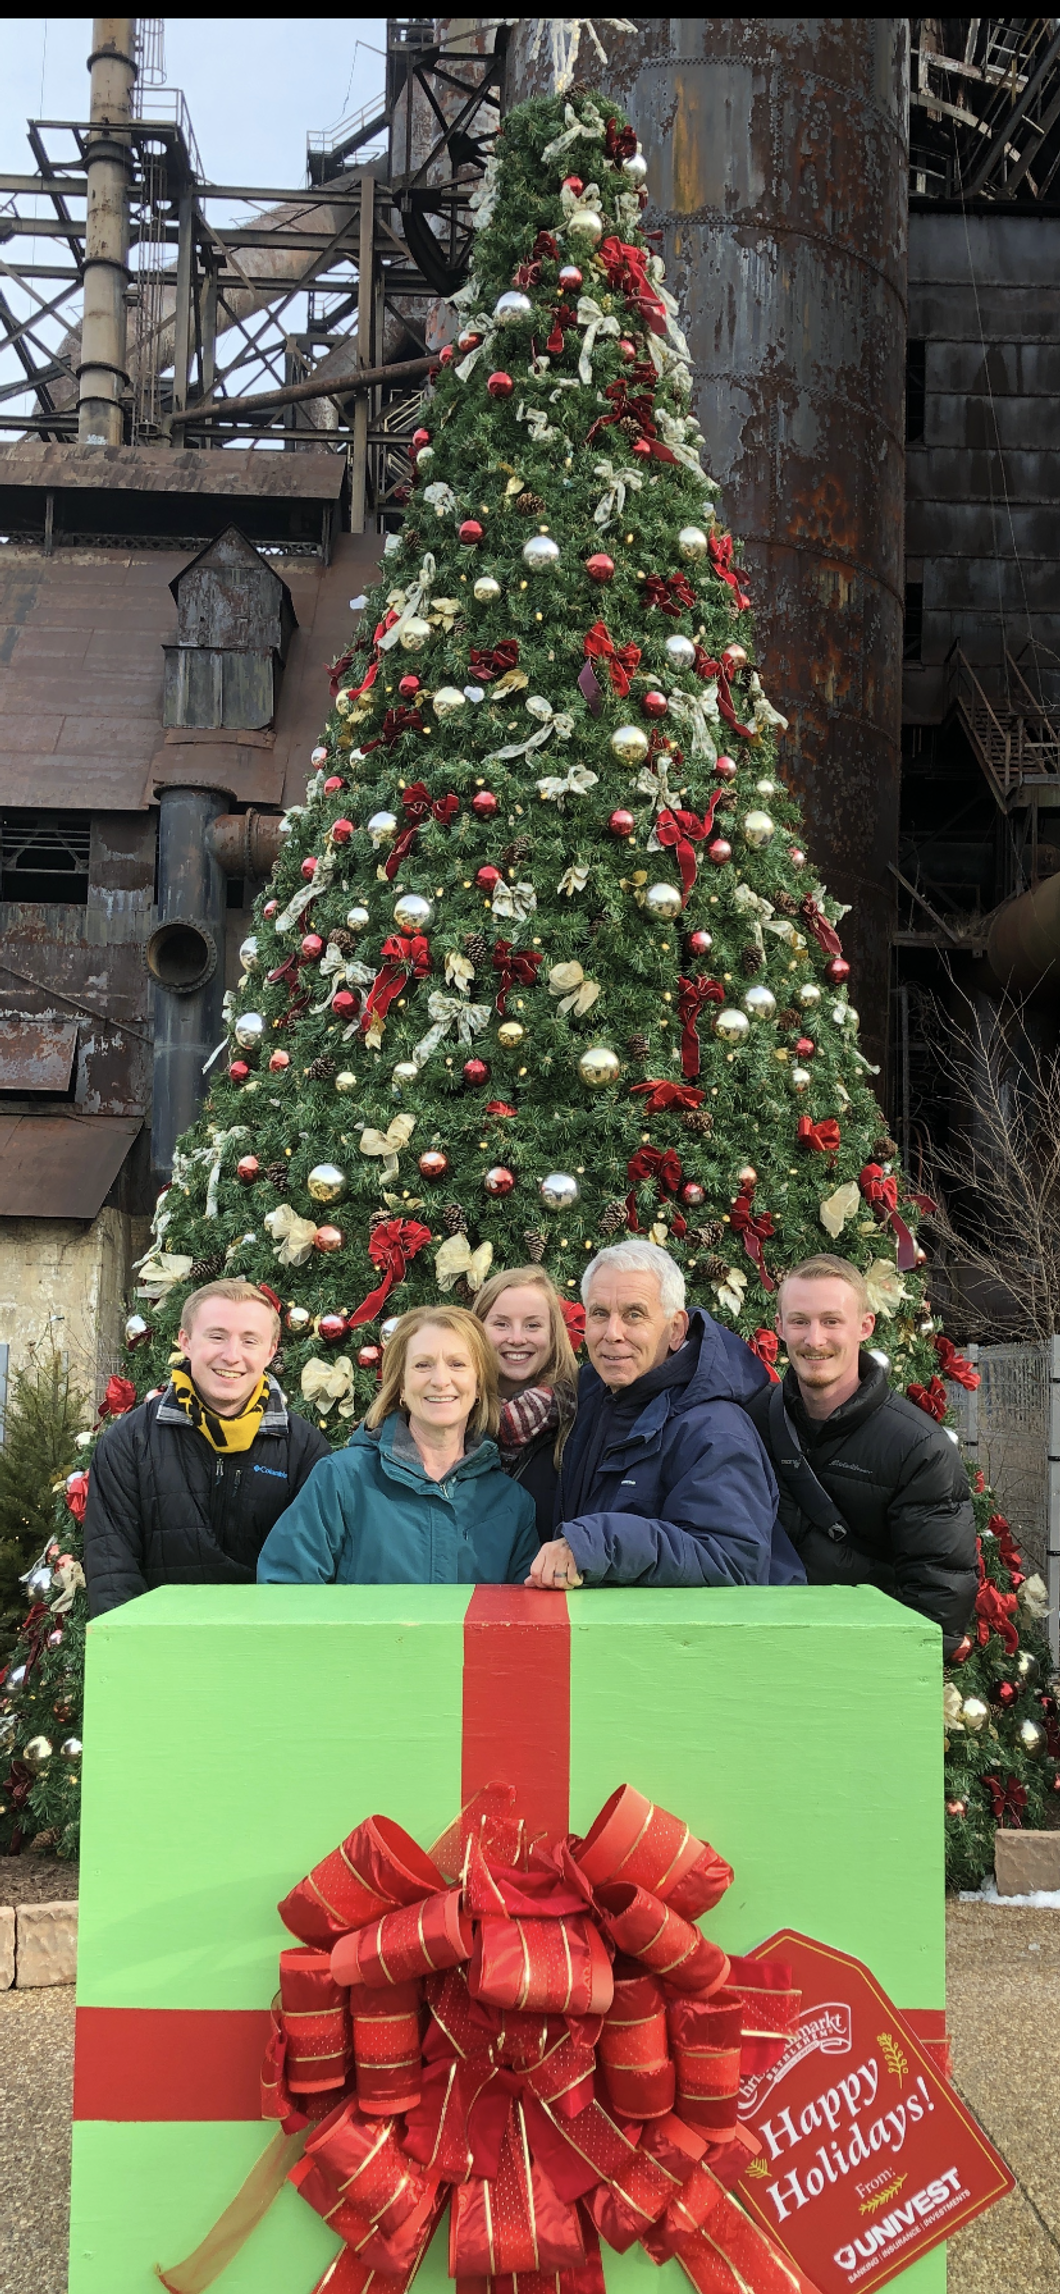 Colin Romaglia (left) stands in front of a Christmas Tree with his family in Pennsylvania.